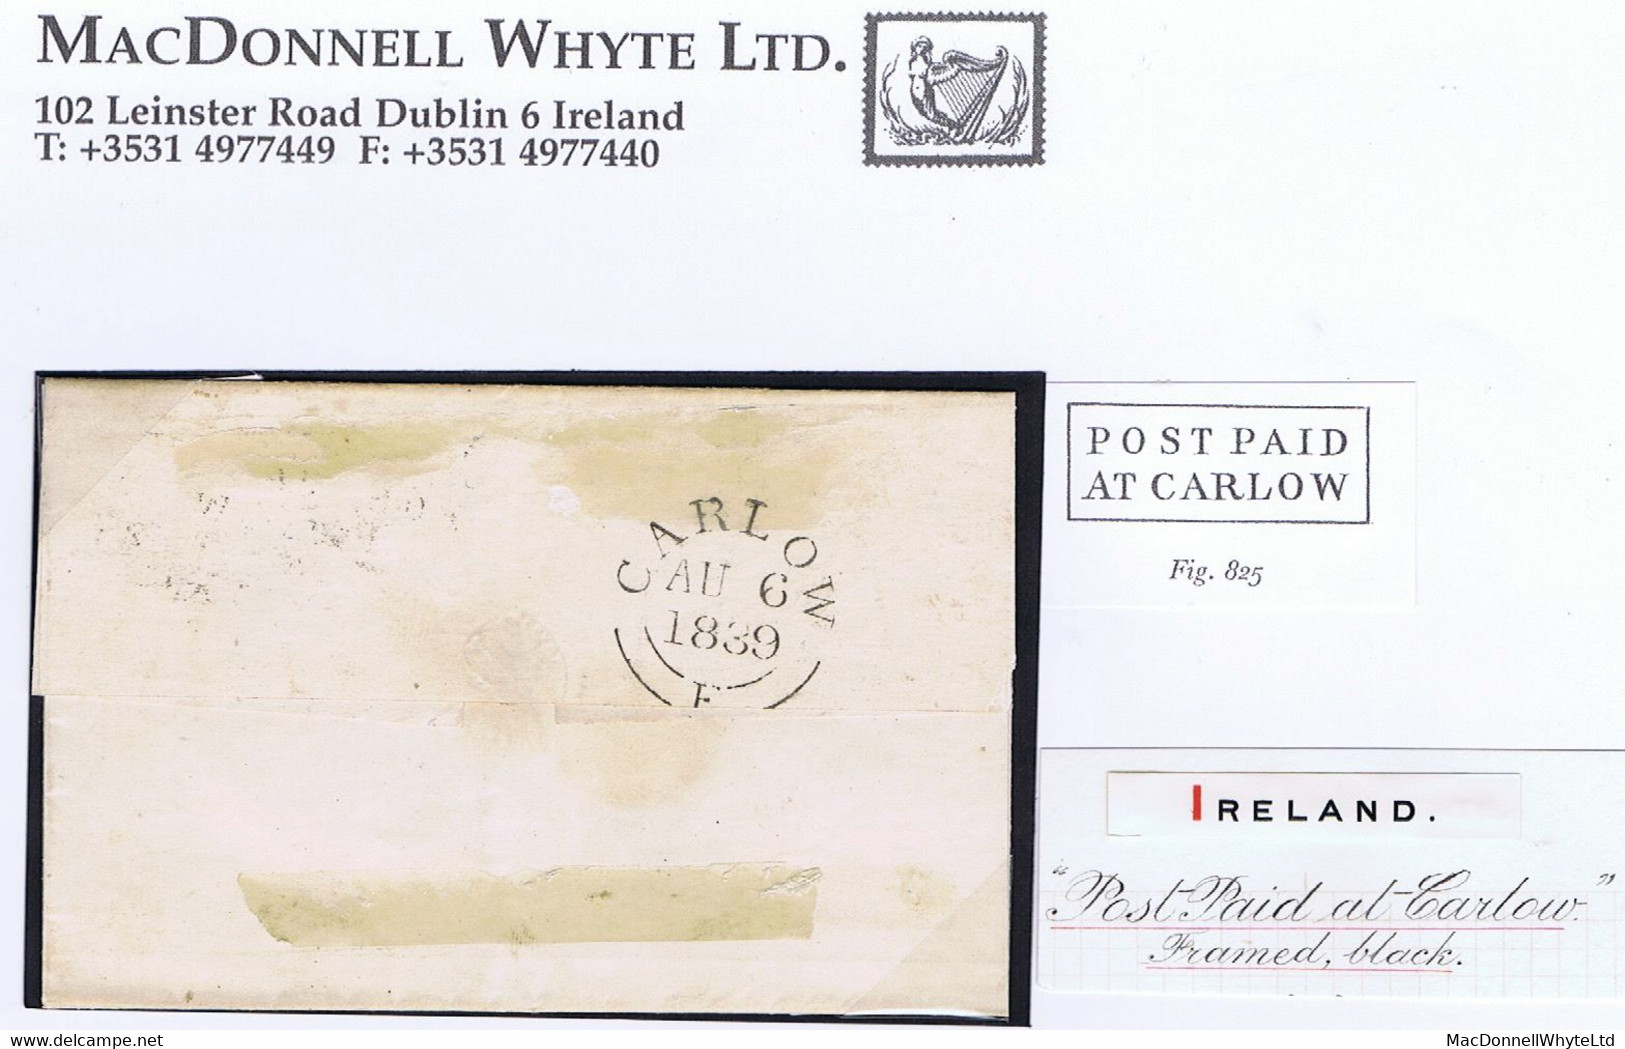 Ireland Carlow 1839 Cover To Dublin Paid '6' With Boxed POST PAID/AT CARLOW, Backstamped CARLOW AU 6 1839 - Préphilatélie